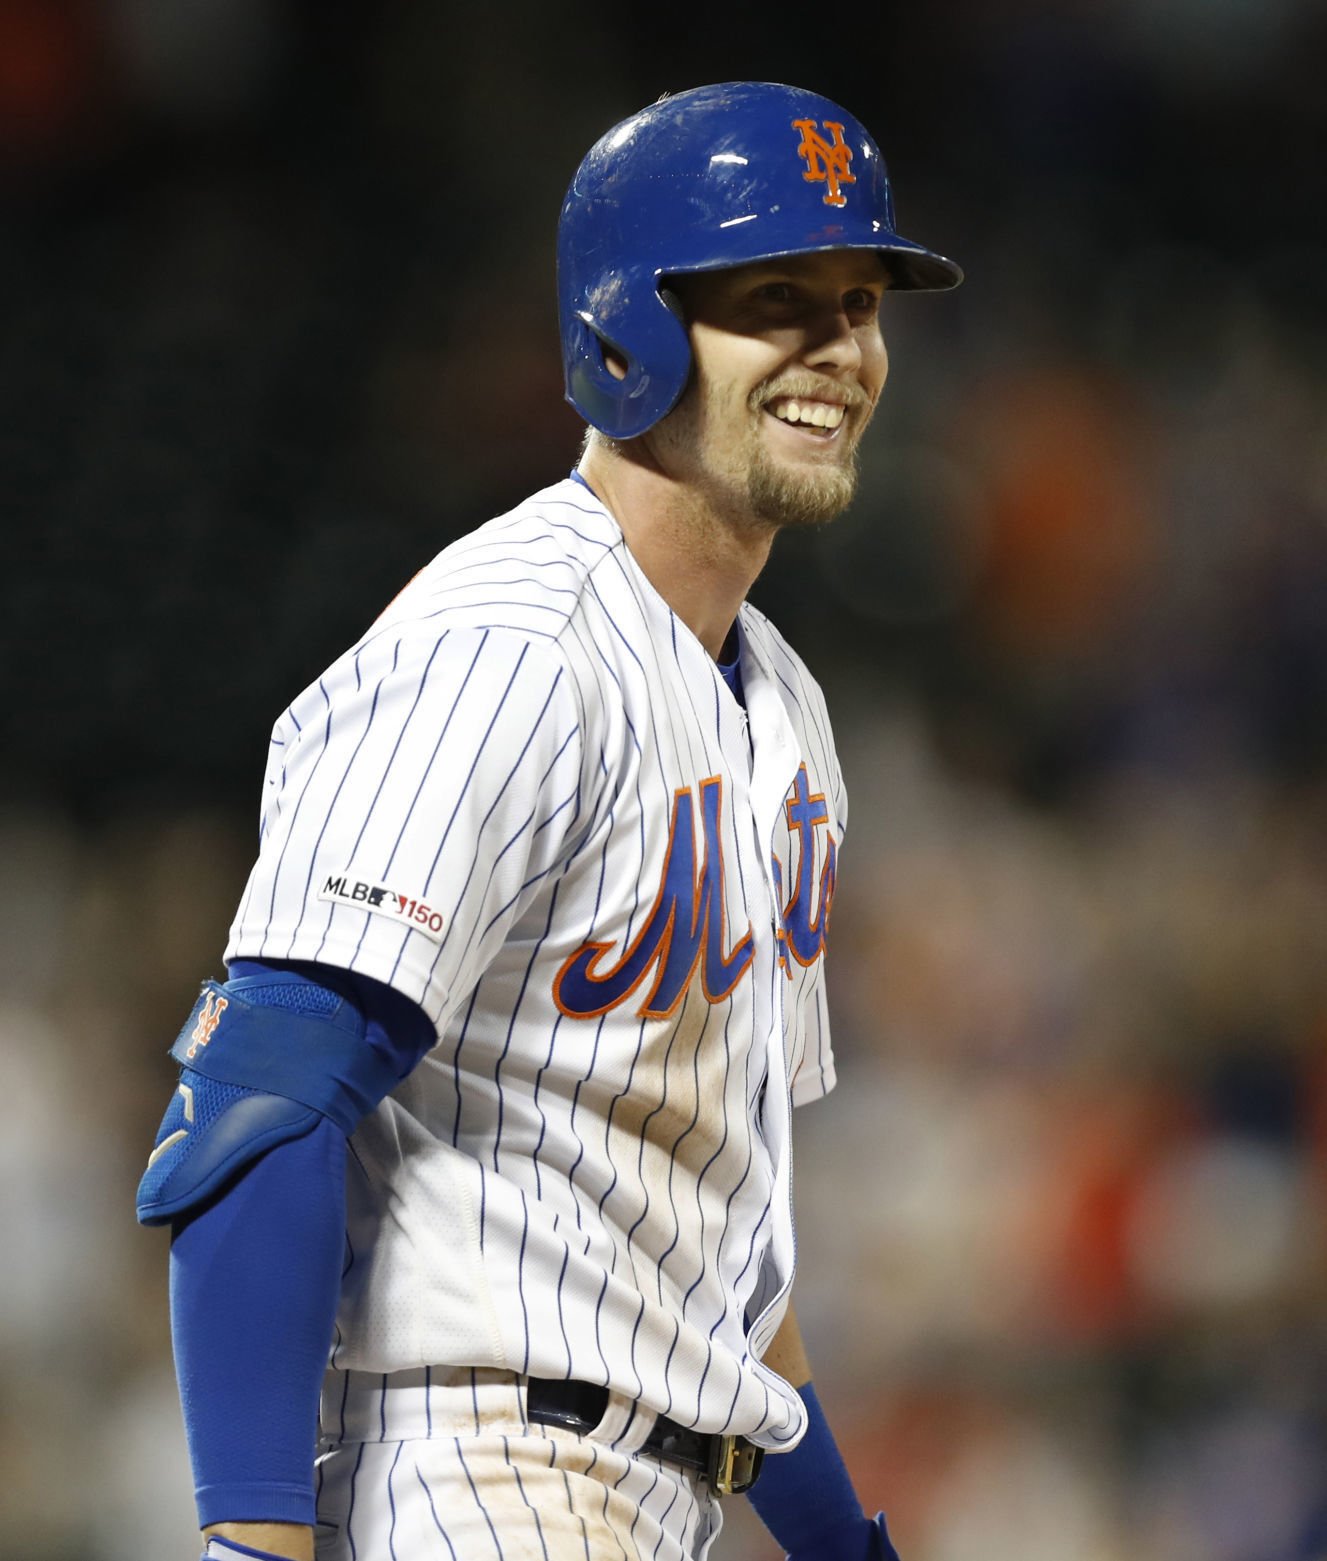 Mets All-Star Jeff McNeil is one of a kind - Amazin' Avenue